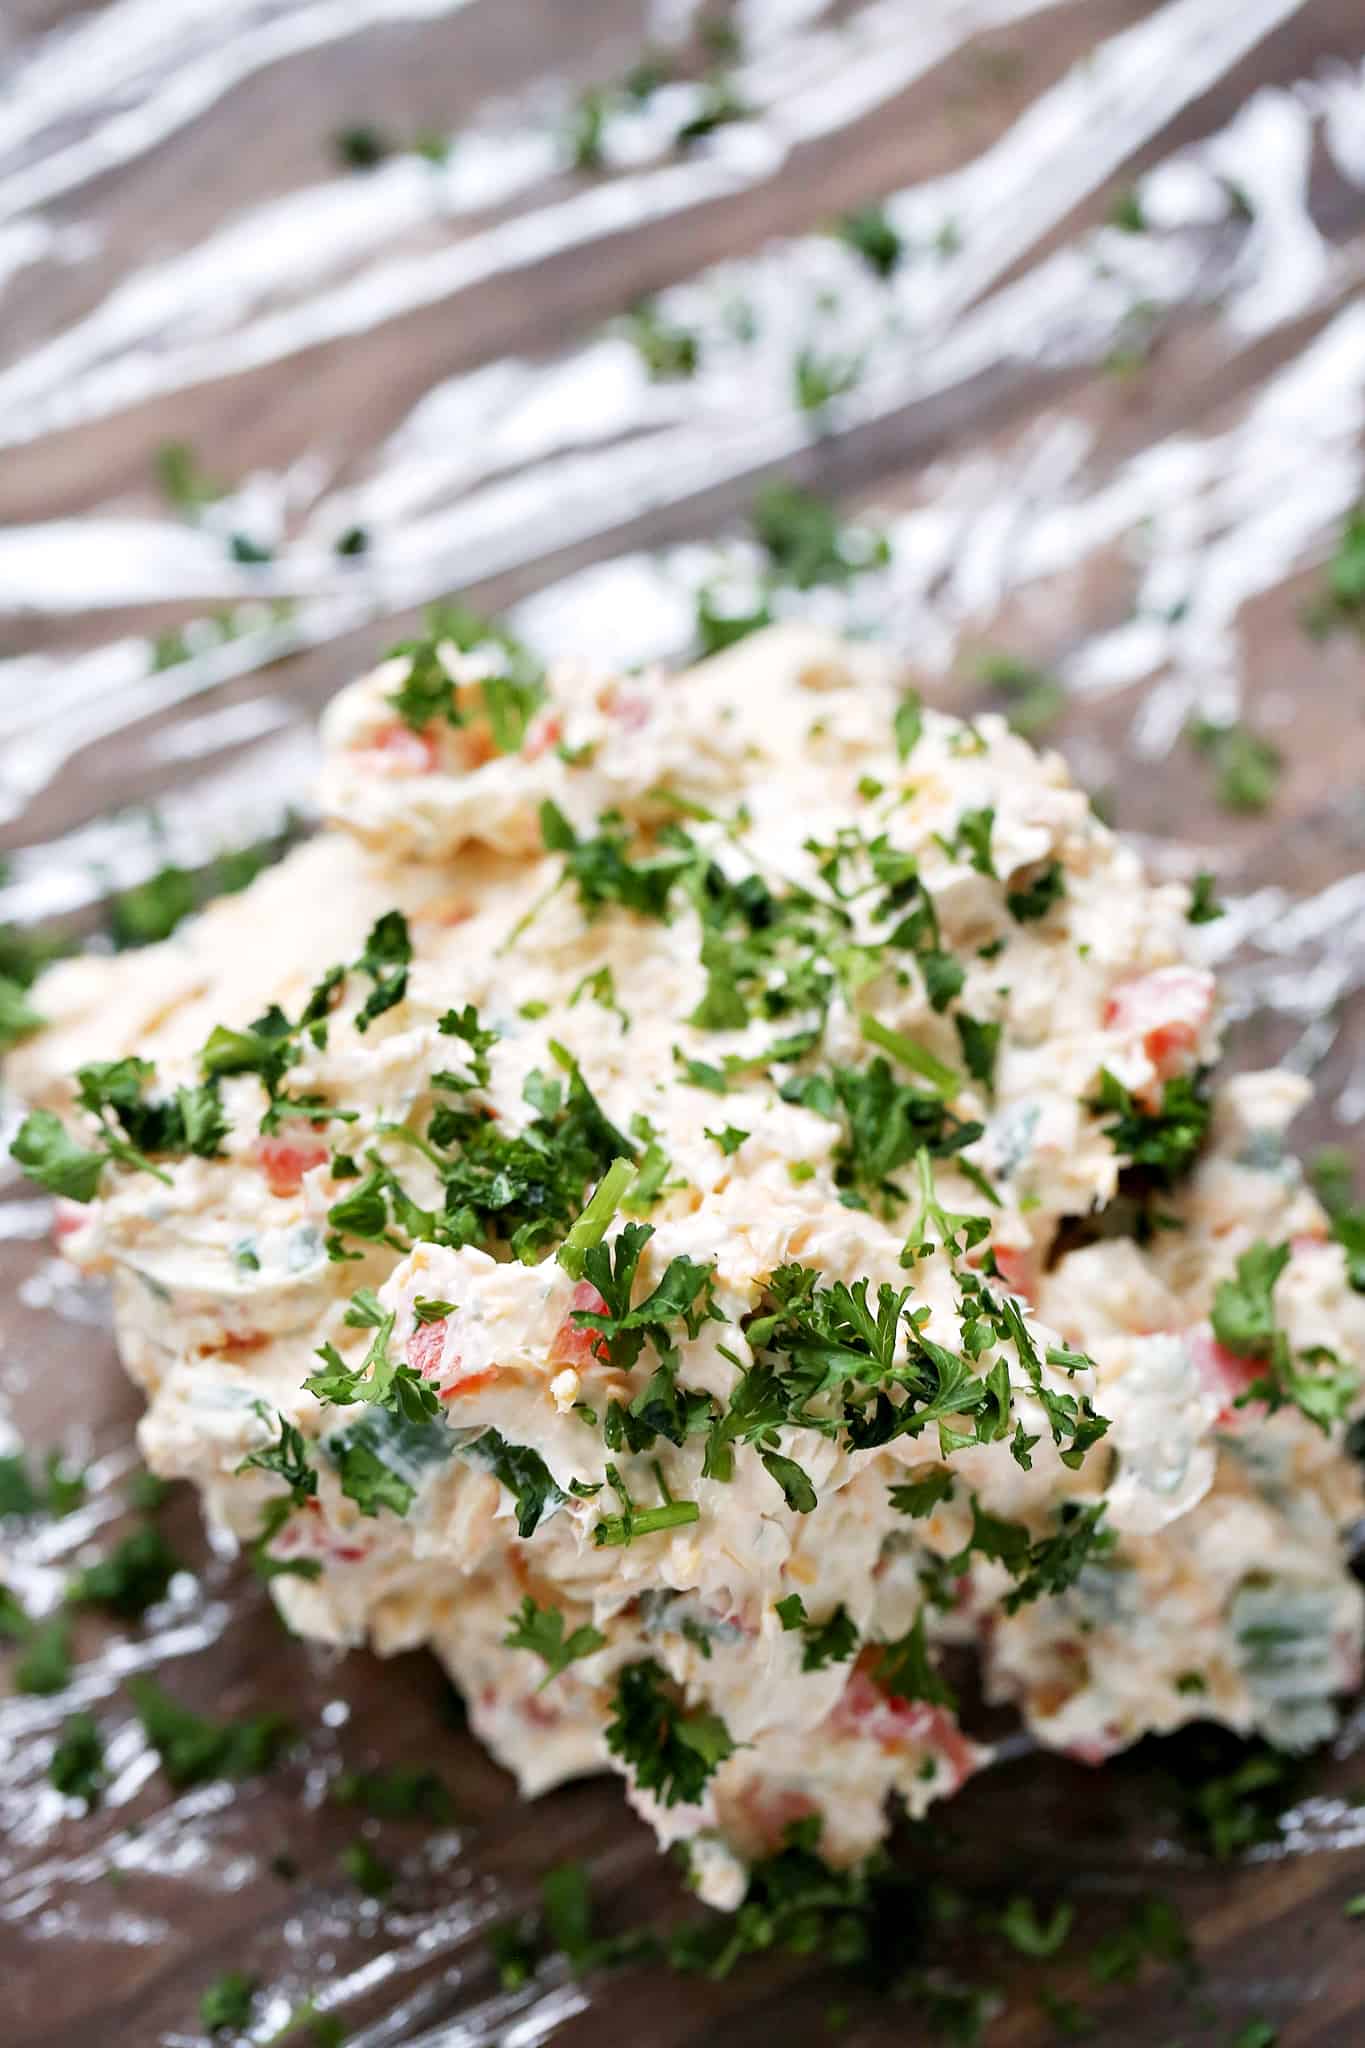 chopped parsley sprinkled on top of cream cheese mixture on plastic wrap.